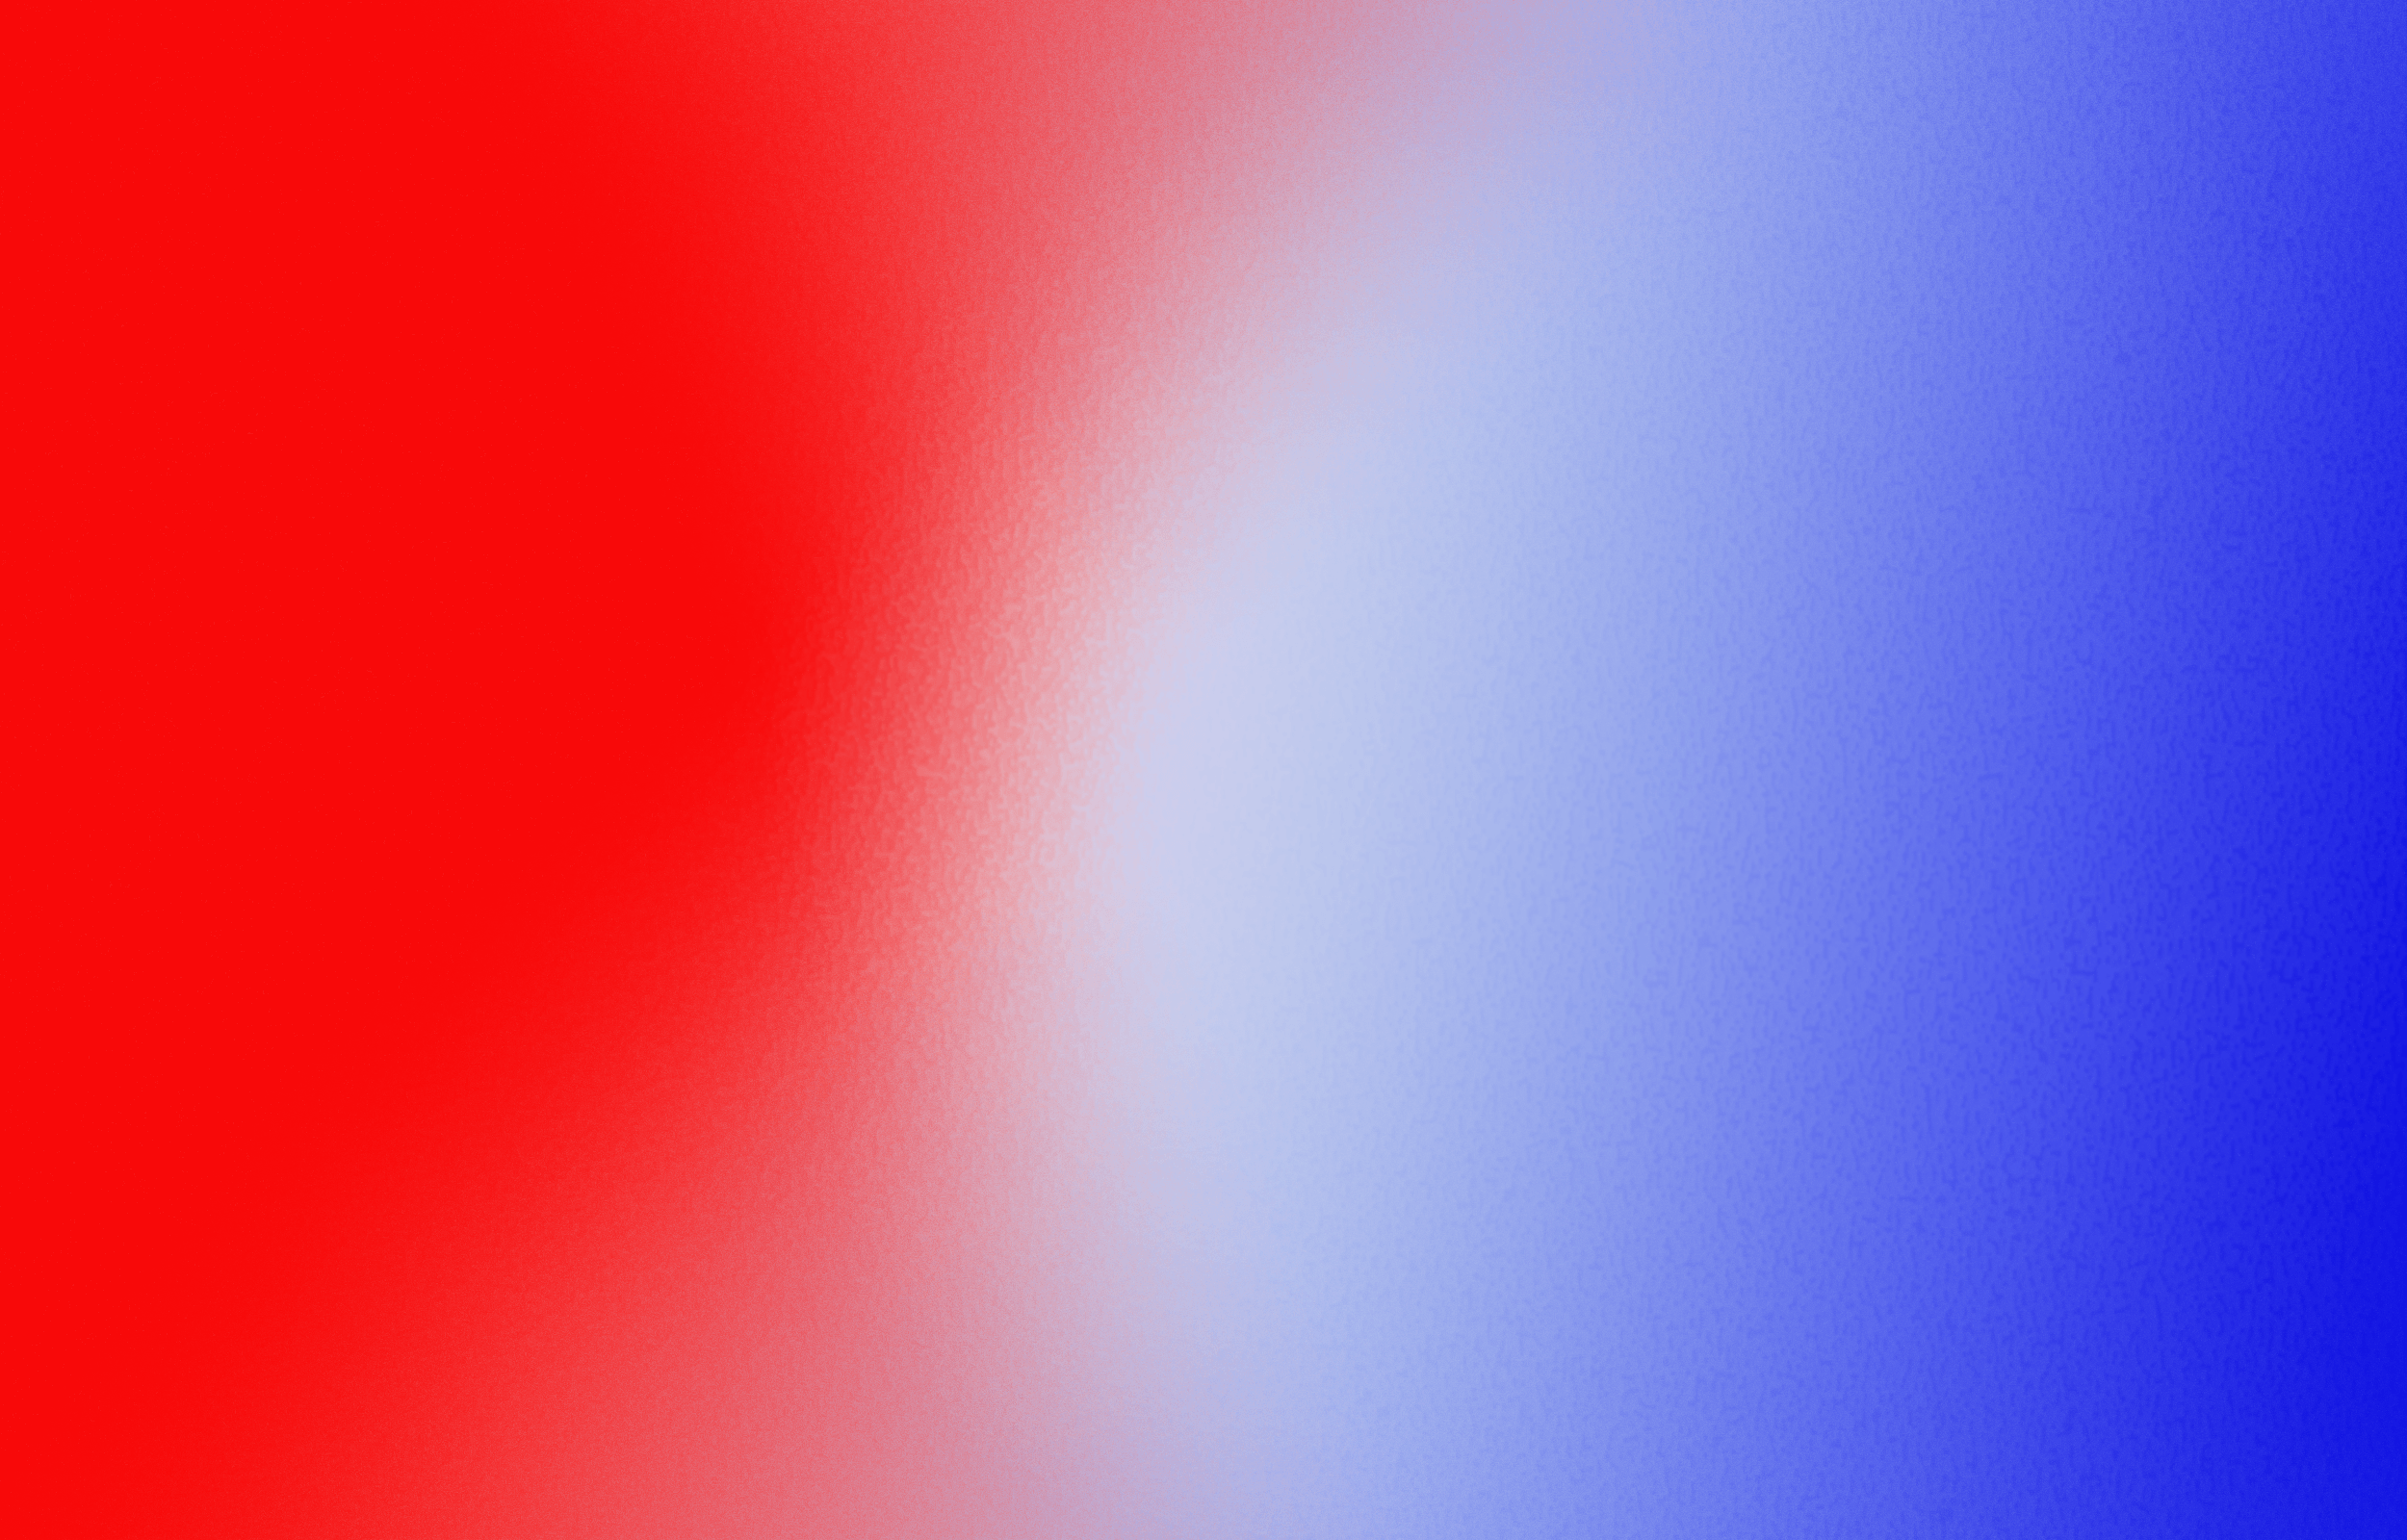 Free download red white and blue stock gradient by brighteyesgal d4fkktypng [2500x1600] for your Desktop, Mobile & Tablet. Explore Red White and Blue Wallpaper. Blue Color Background Wallpaper, Blue